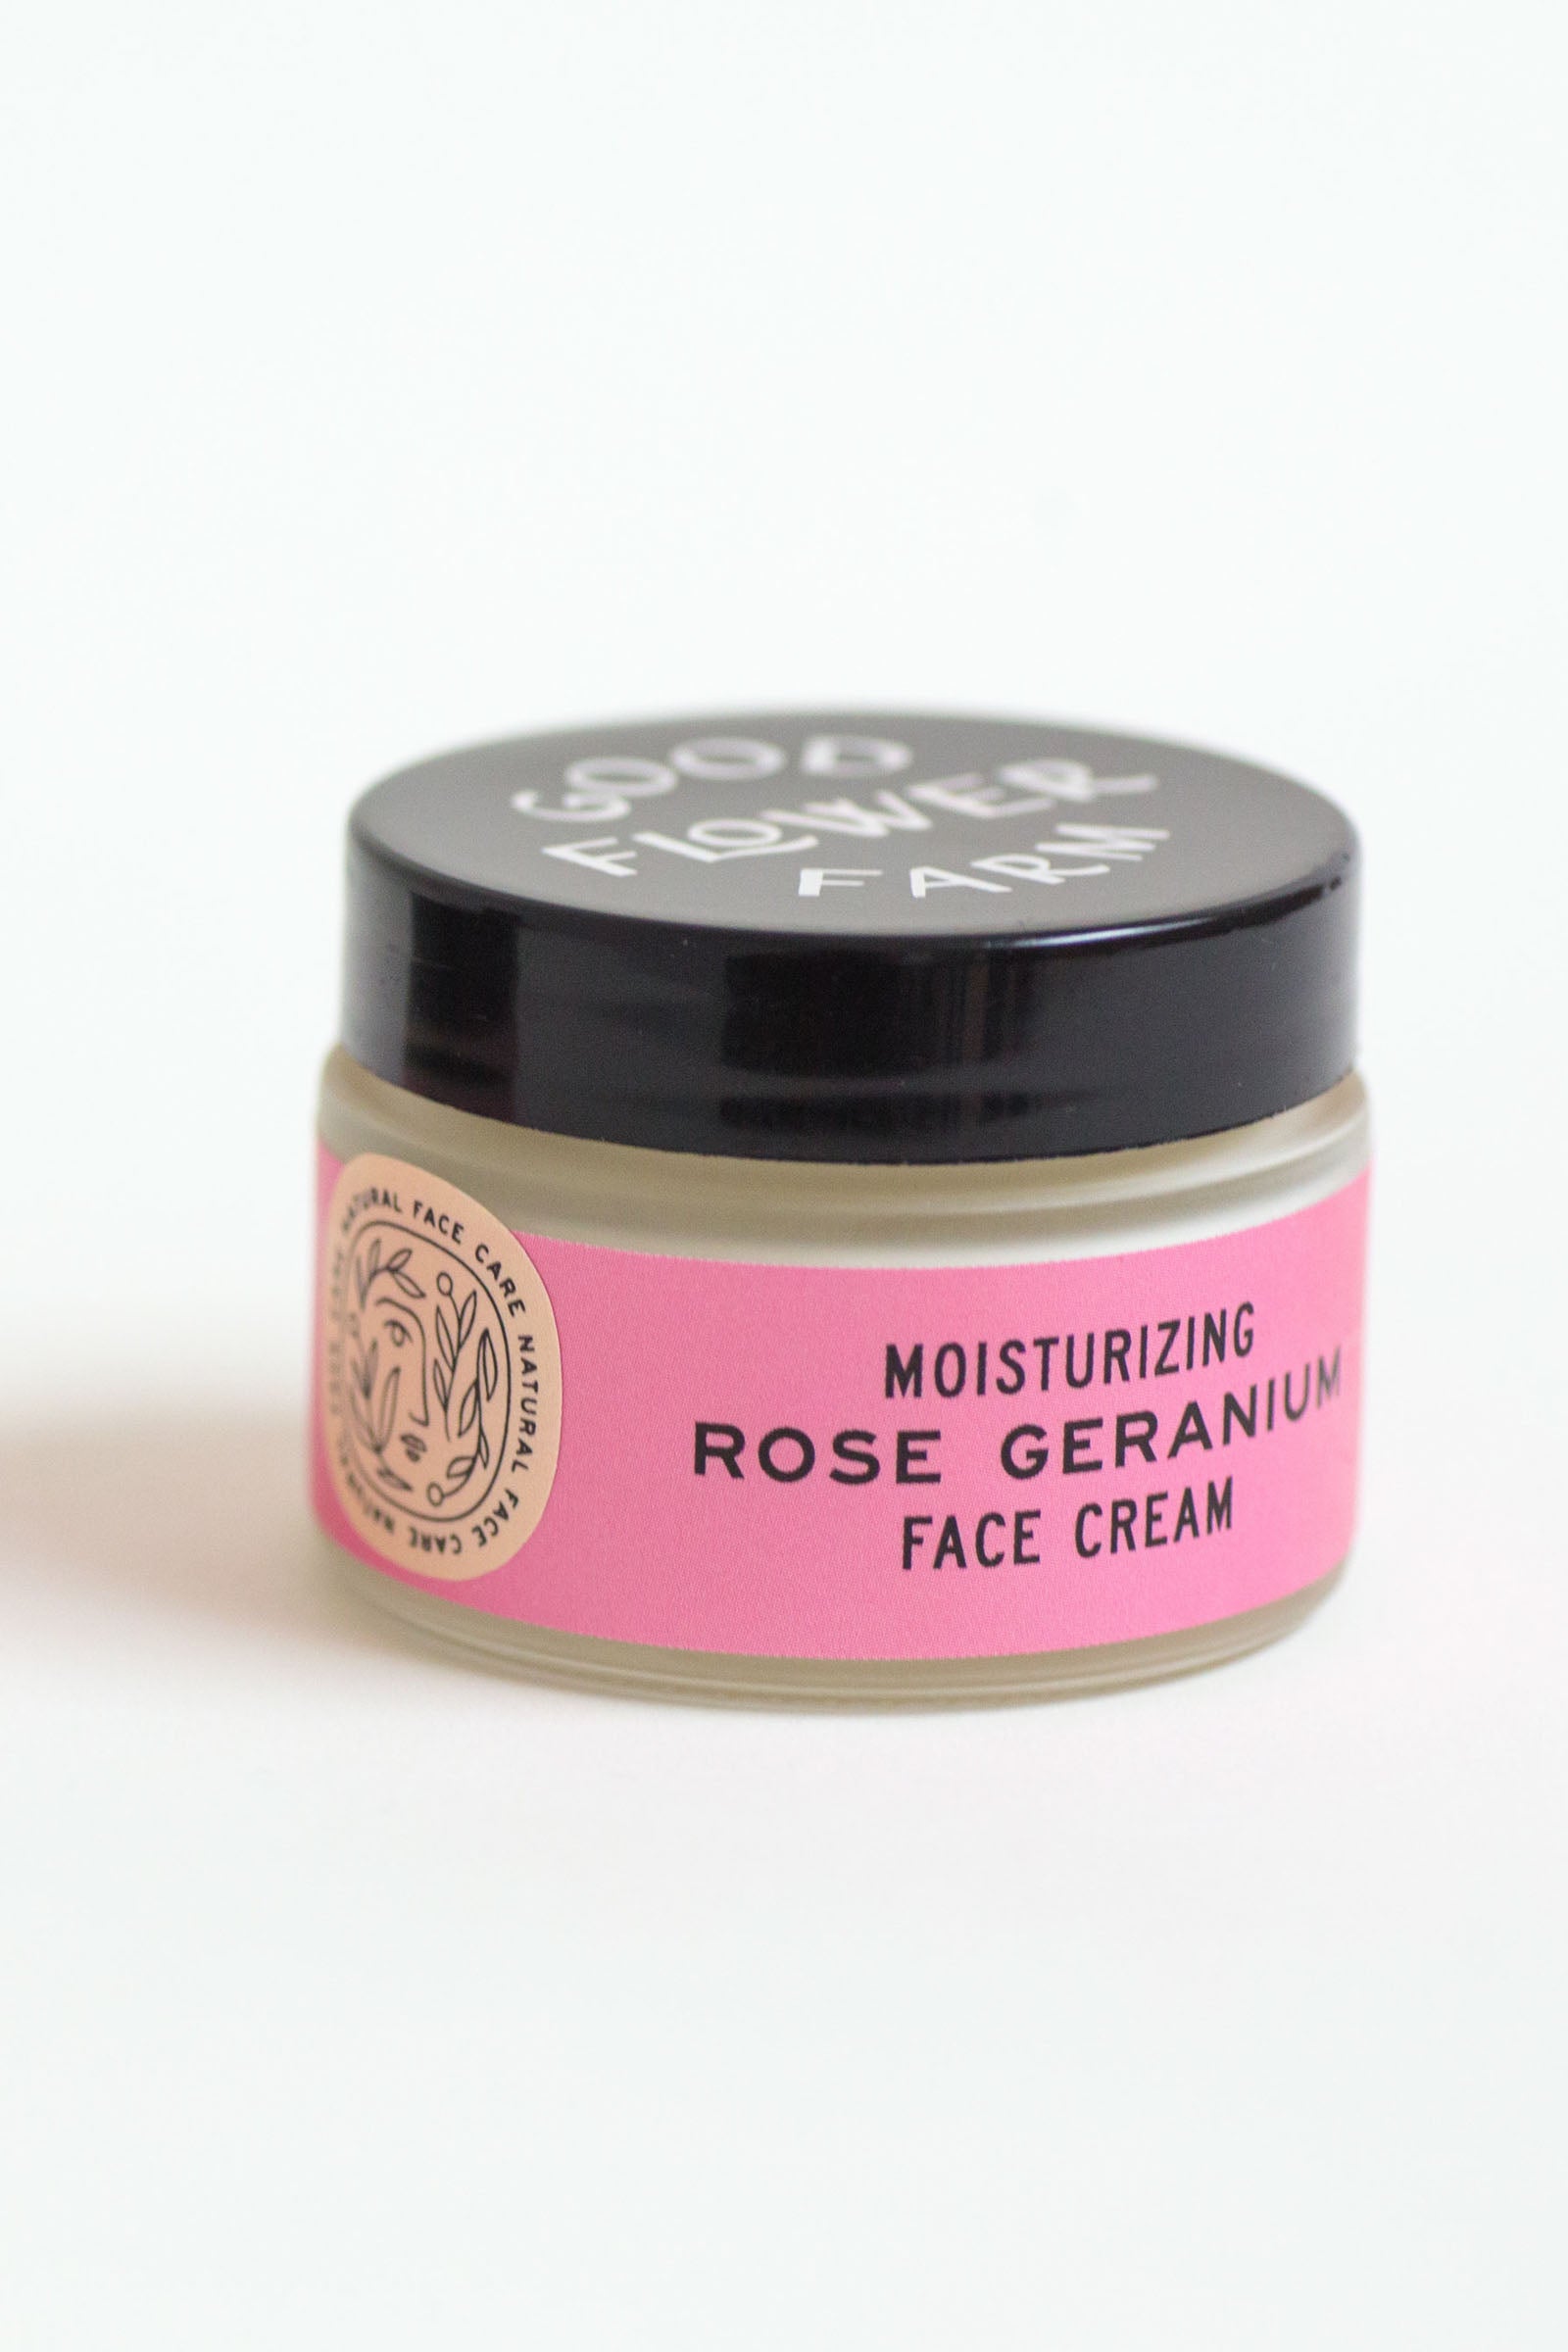 Rose Geranium organic facial cream made with herb infused oil by Good Flower Farm